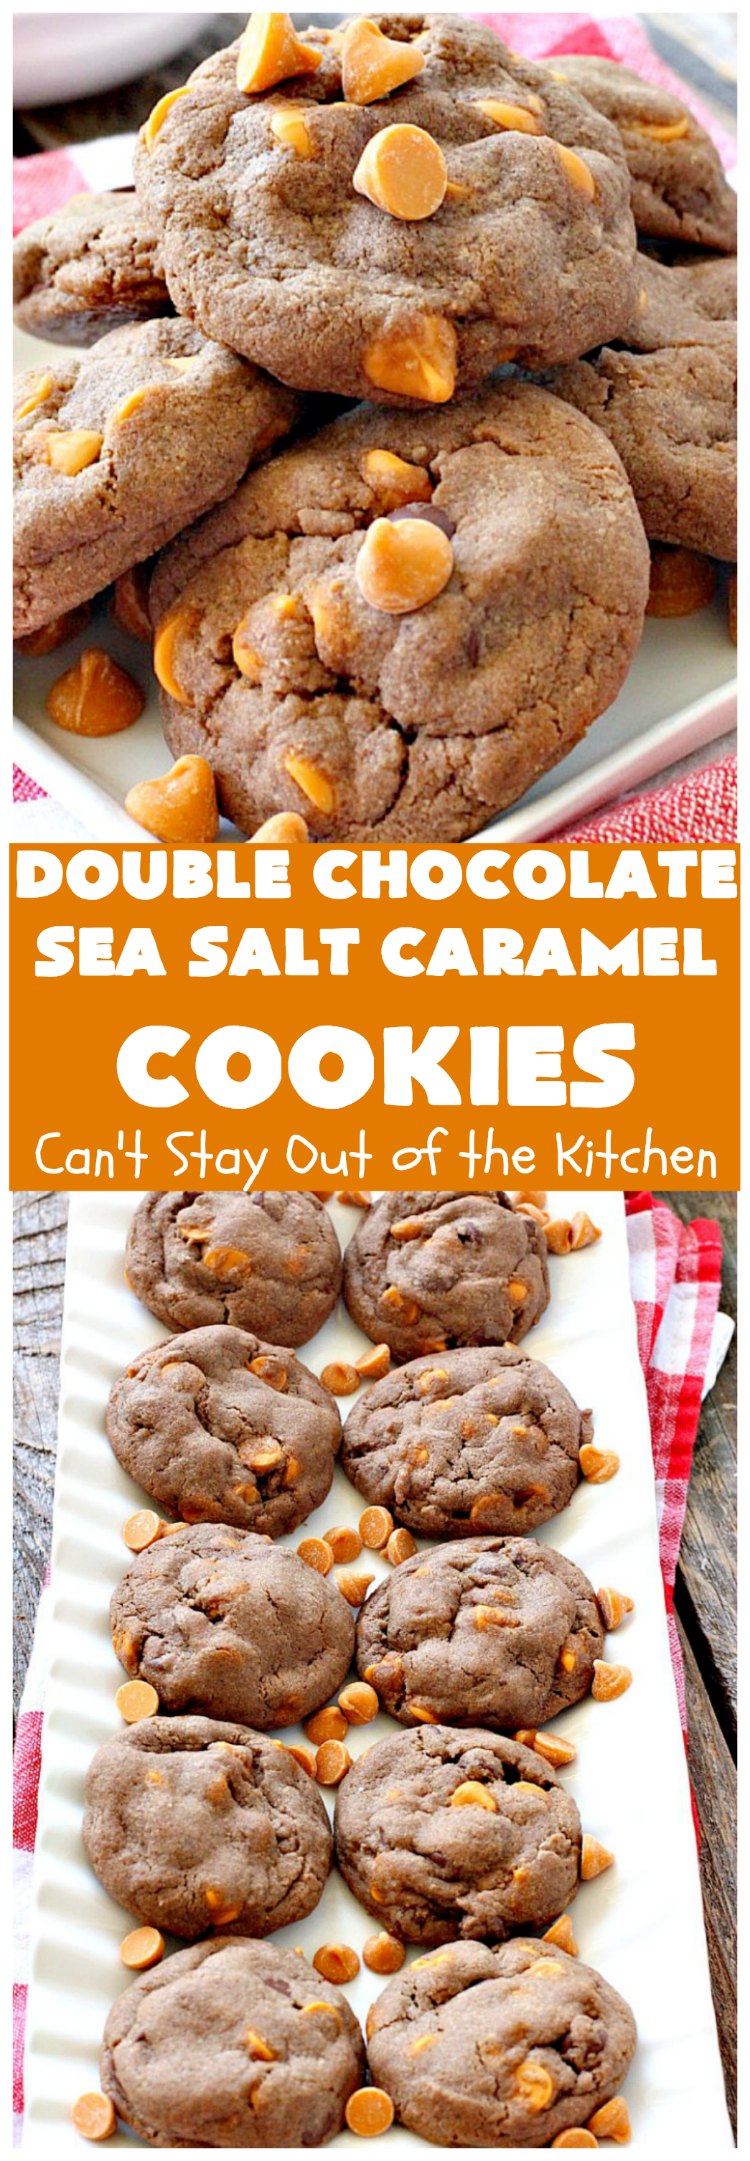 Double Chocolate Sea Salt Caramel Cookies | Can't Stay Out of the Kitchen